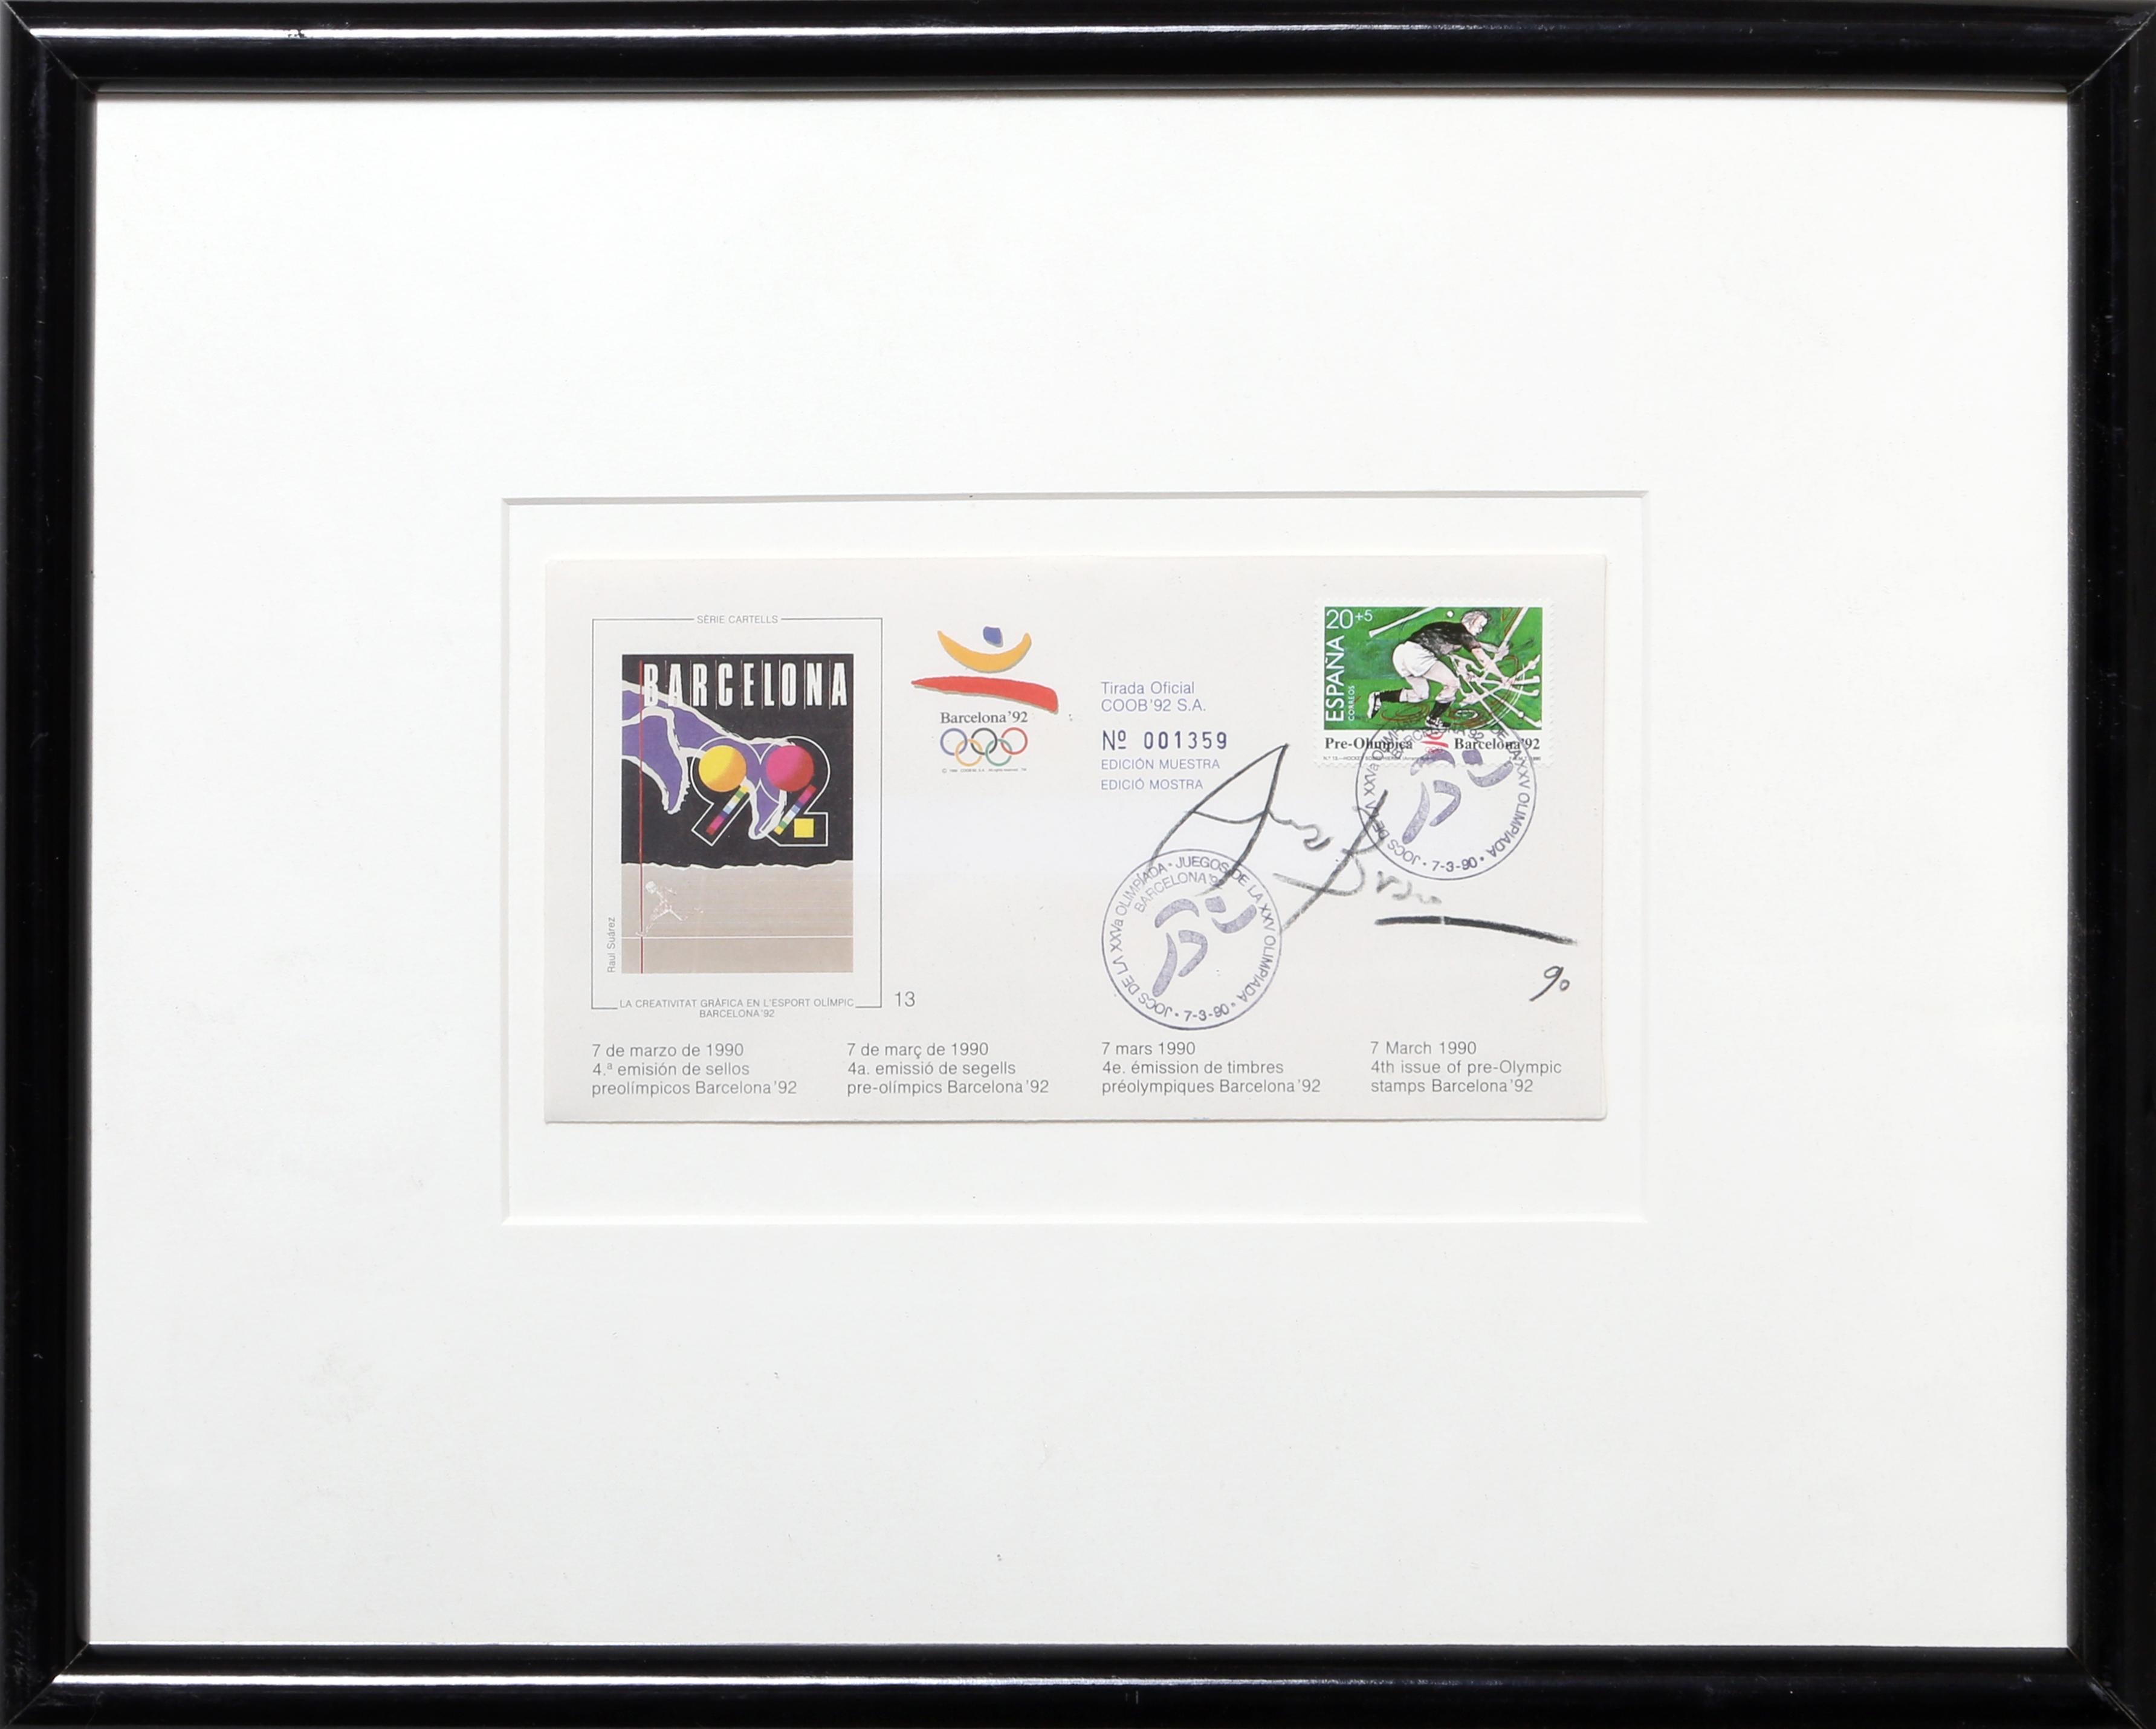 Pre-Olympic stamps created for the ‘92 Barcelona Olympics by Spanish artist Eduardo Arranz Bravo.

Barcelona Pre-Olympic Stamp 1
Eduardo Arranz-Bravo, Spanish (1941)
Date: 1990
Mixed Media on Paper, signed
Edition of 4th Issue
Size: 3.75 x 7.25 in.